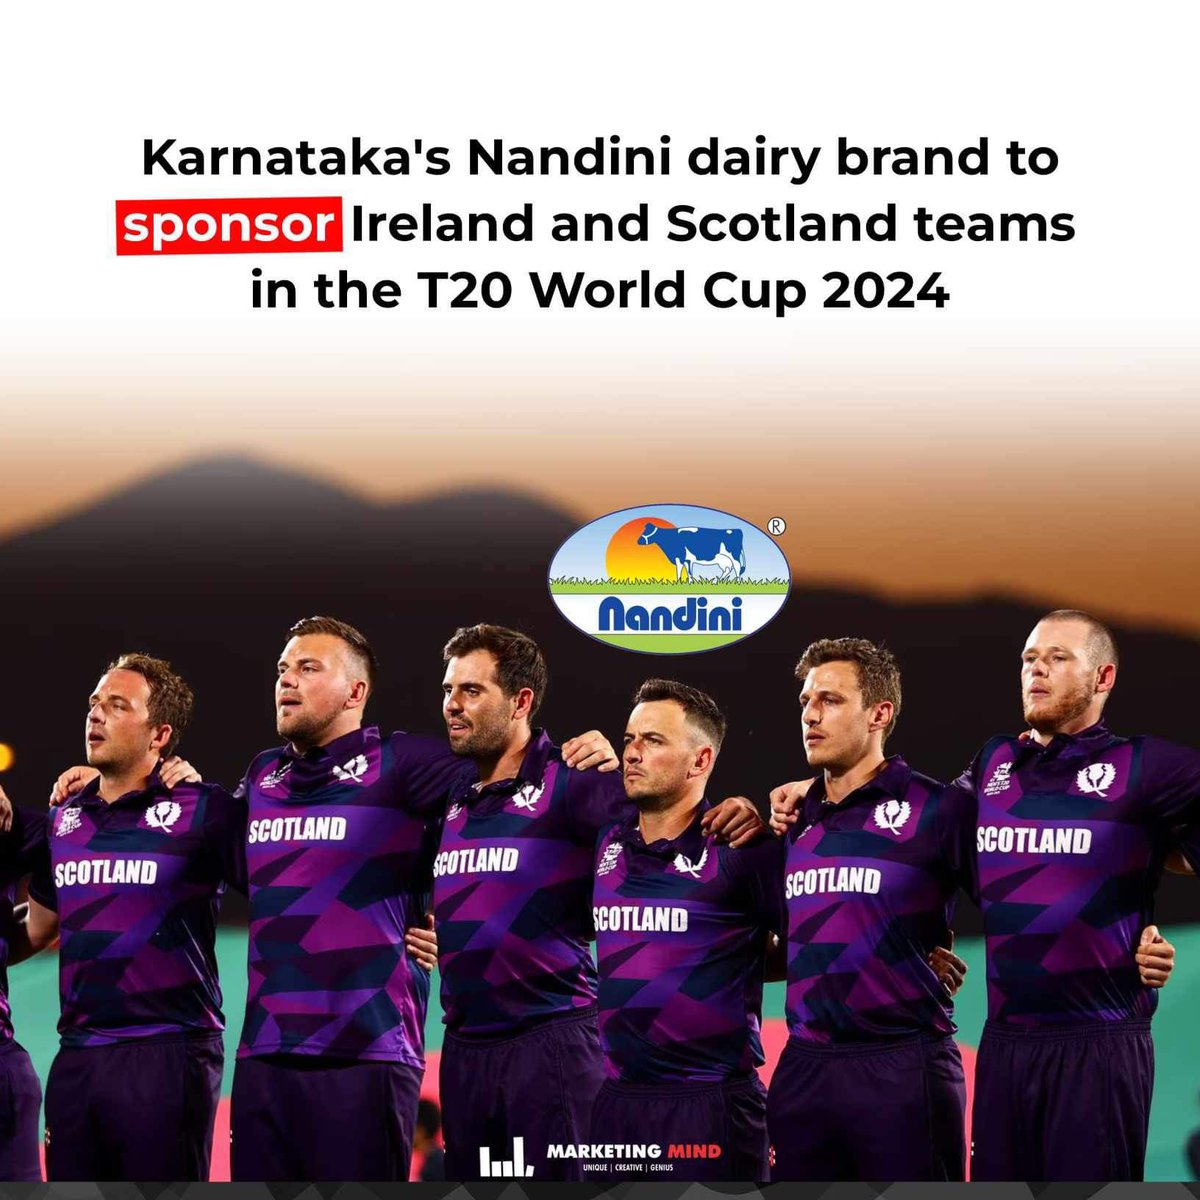 The ‘Nandini logo’ will now be seen on the jerseys of Scotland and Ireland cricket teams in the ICC Men’s T20 World Cup, to be played in the United States of America and West Indies from June 1 to 29.

#MarketingMind #WhatsBuzzing #Nandini